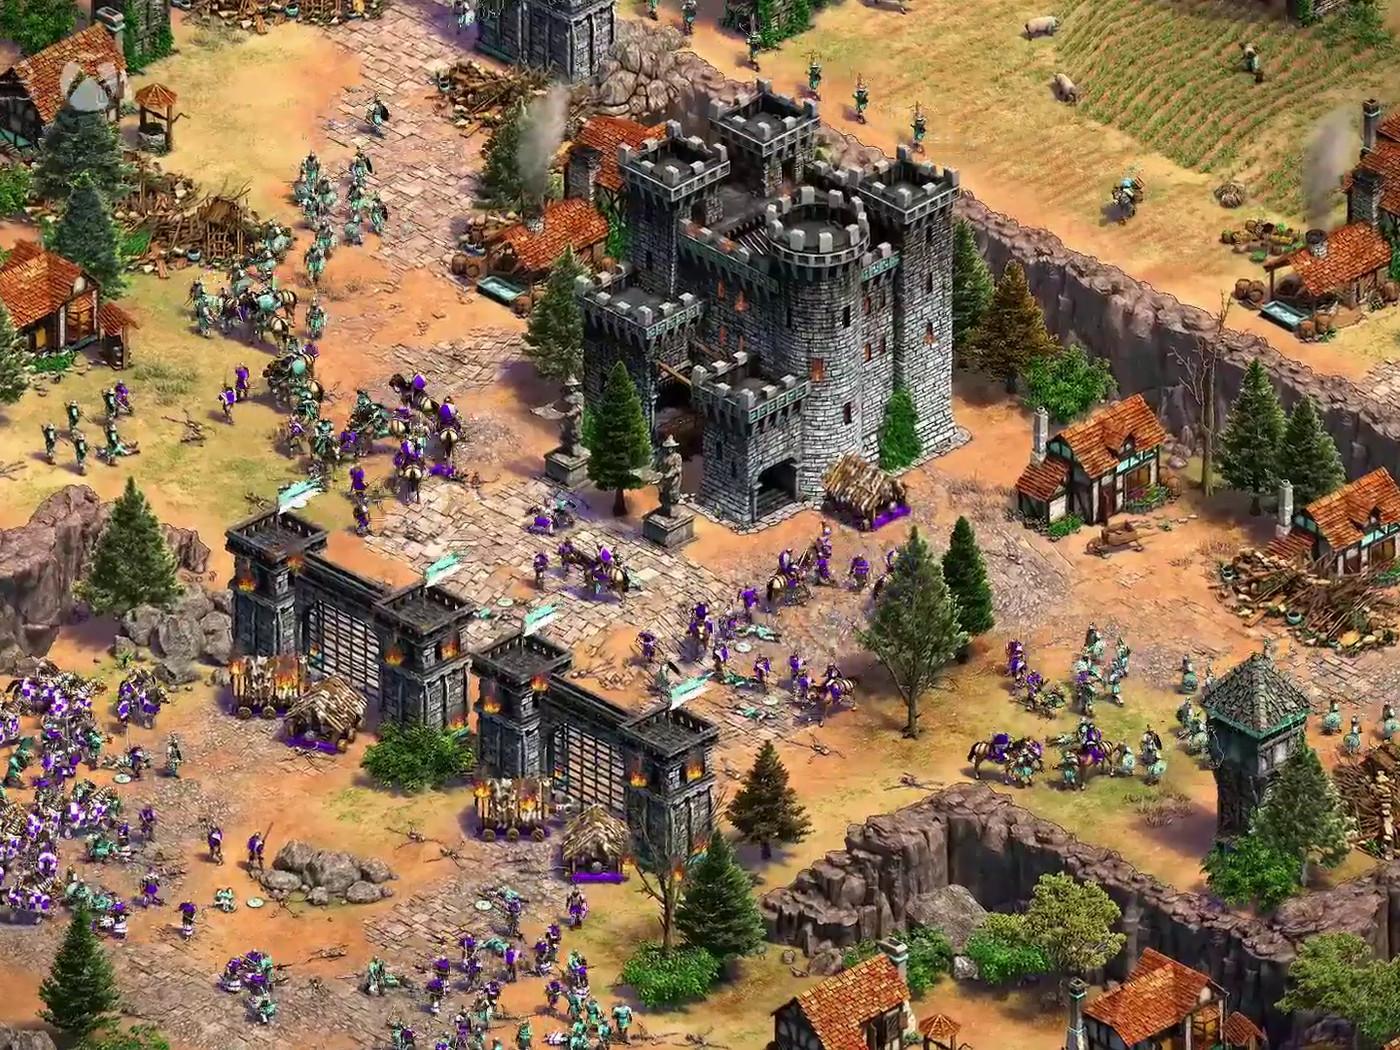 Image Age of Empires Age of Empires 3 vdeo game